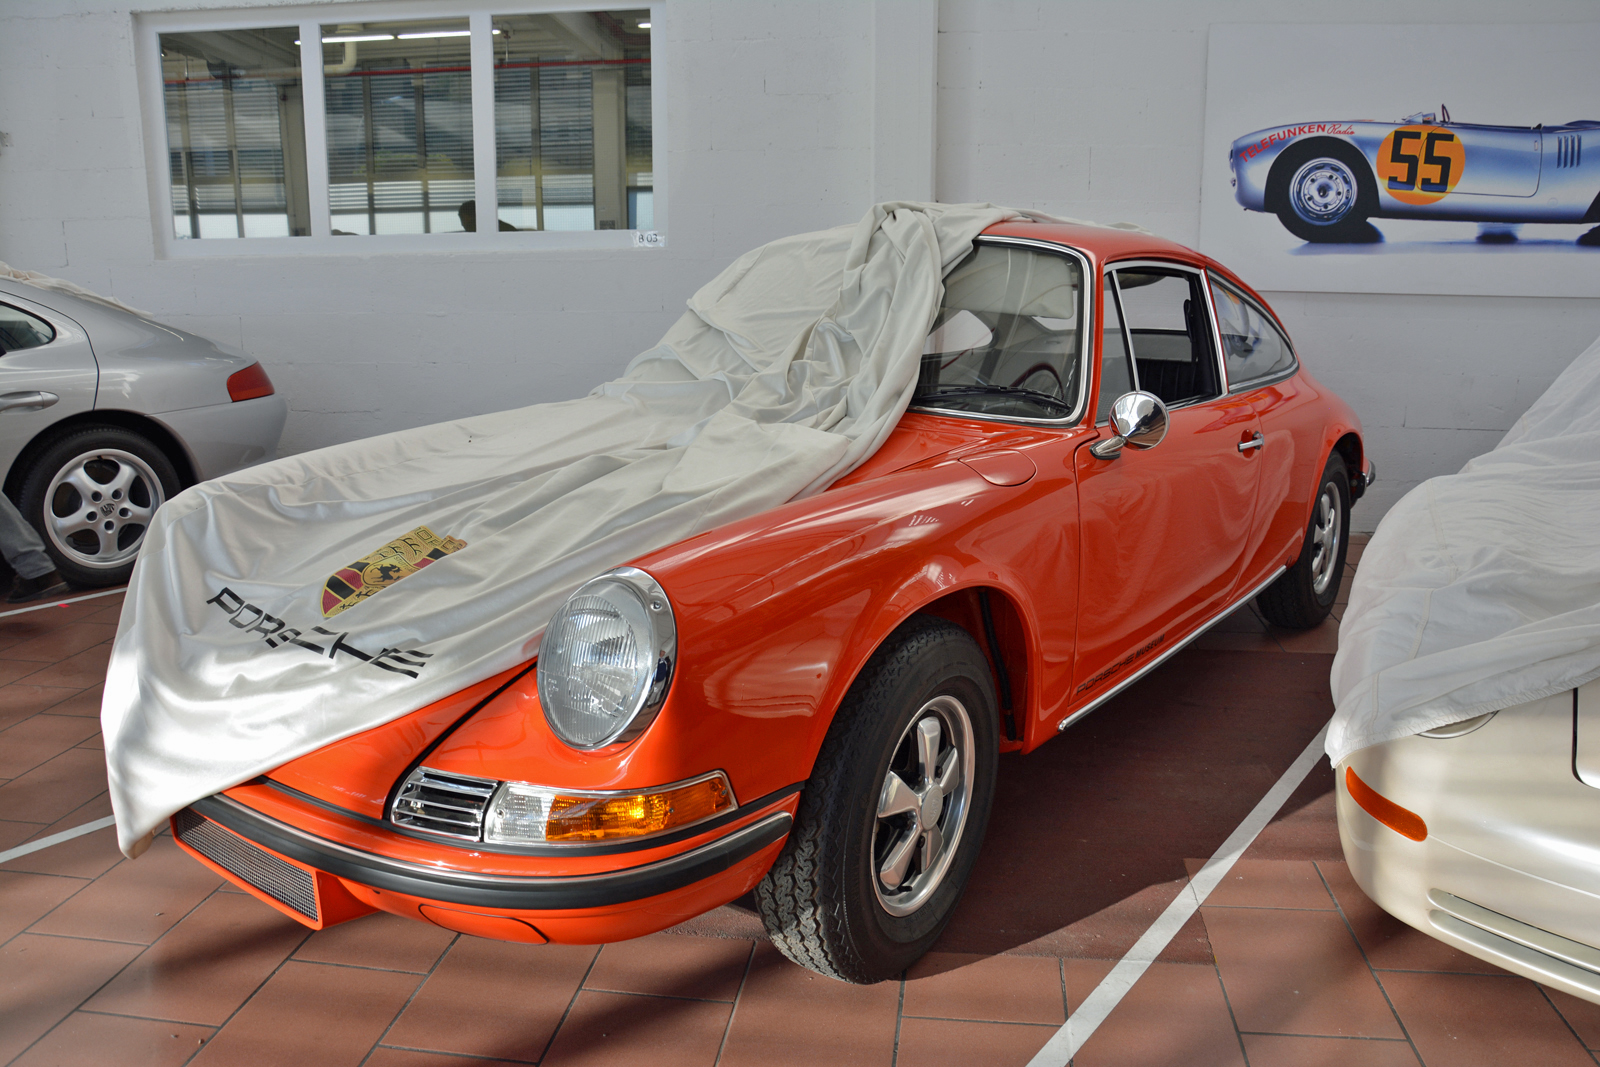 <p>The Type 915 explored how to package four adult-sized seats into a 911. Porsche added about a foot of sheet metal between the axles, allowing the coupe to carry four passengers in <strong>relative comfort</strong>. Company executives ultimately chose not to turn the Type 915 into a production model because they feared it would cannibalize the brand’s other cars.</p>